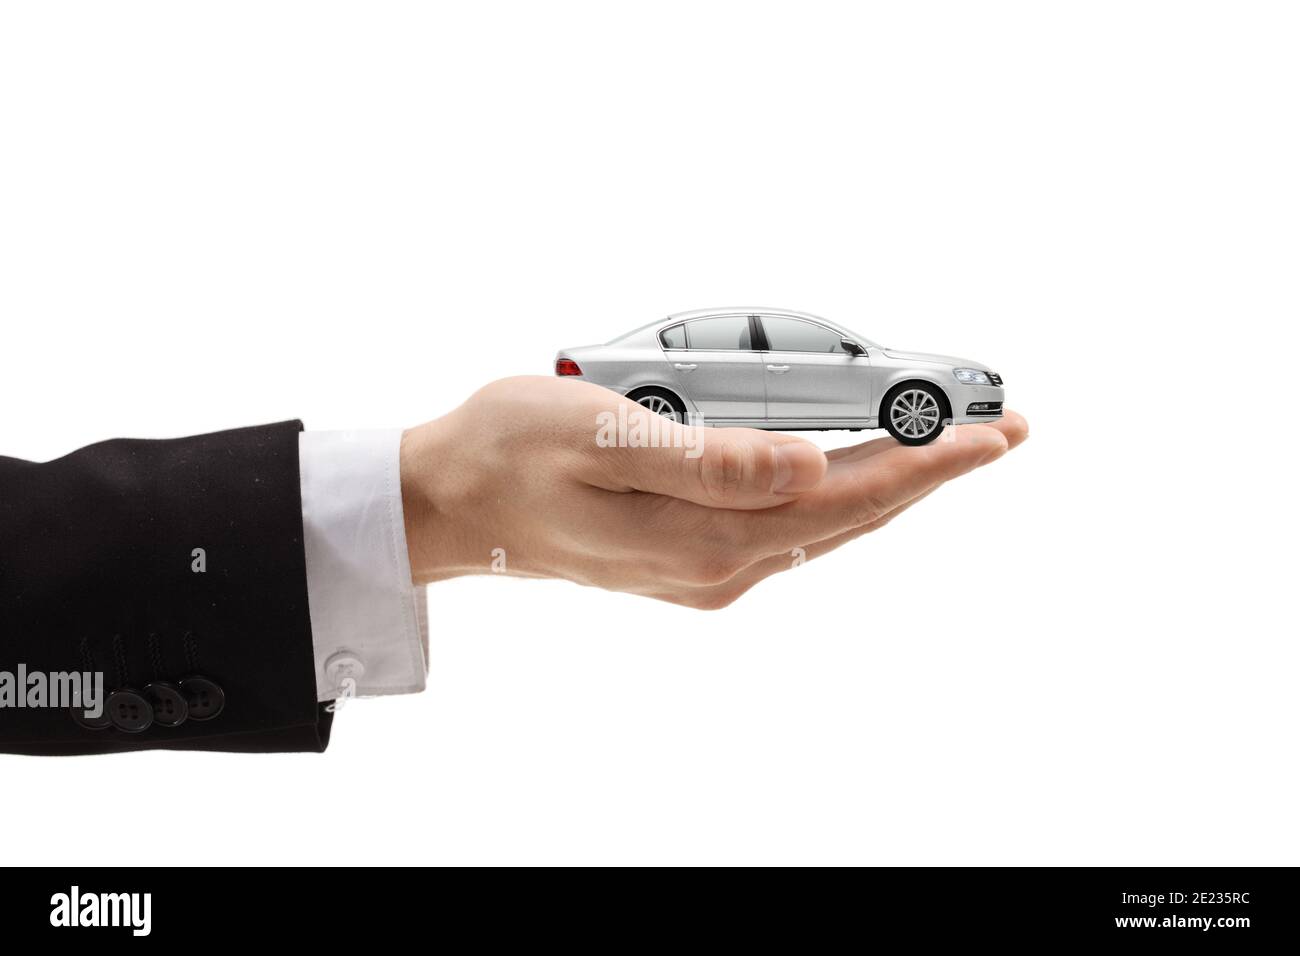 Male hand holding a silver model car isolated on white background Stock Photo